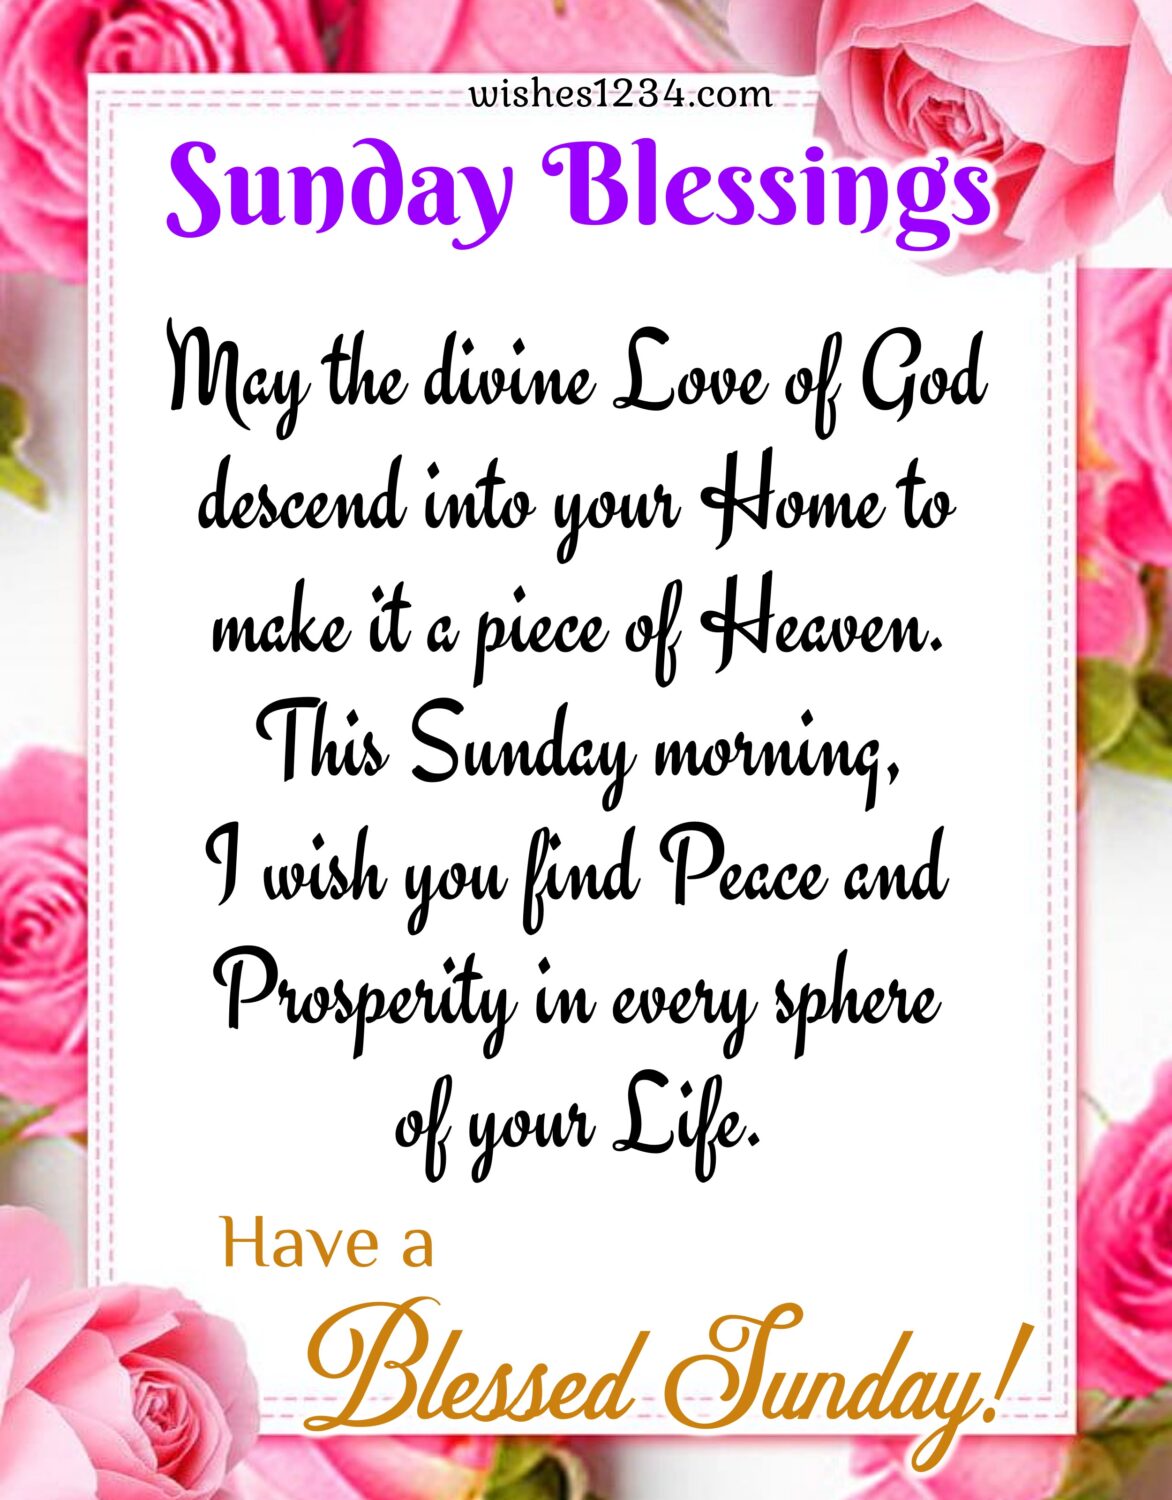 SuSunday blessings image with pink roses border, Sunday Blessings Images.